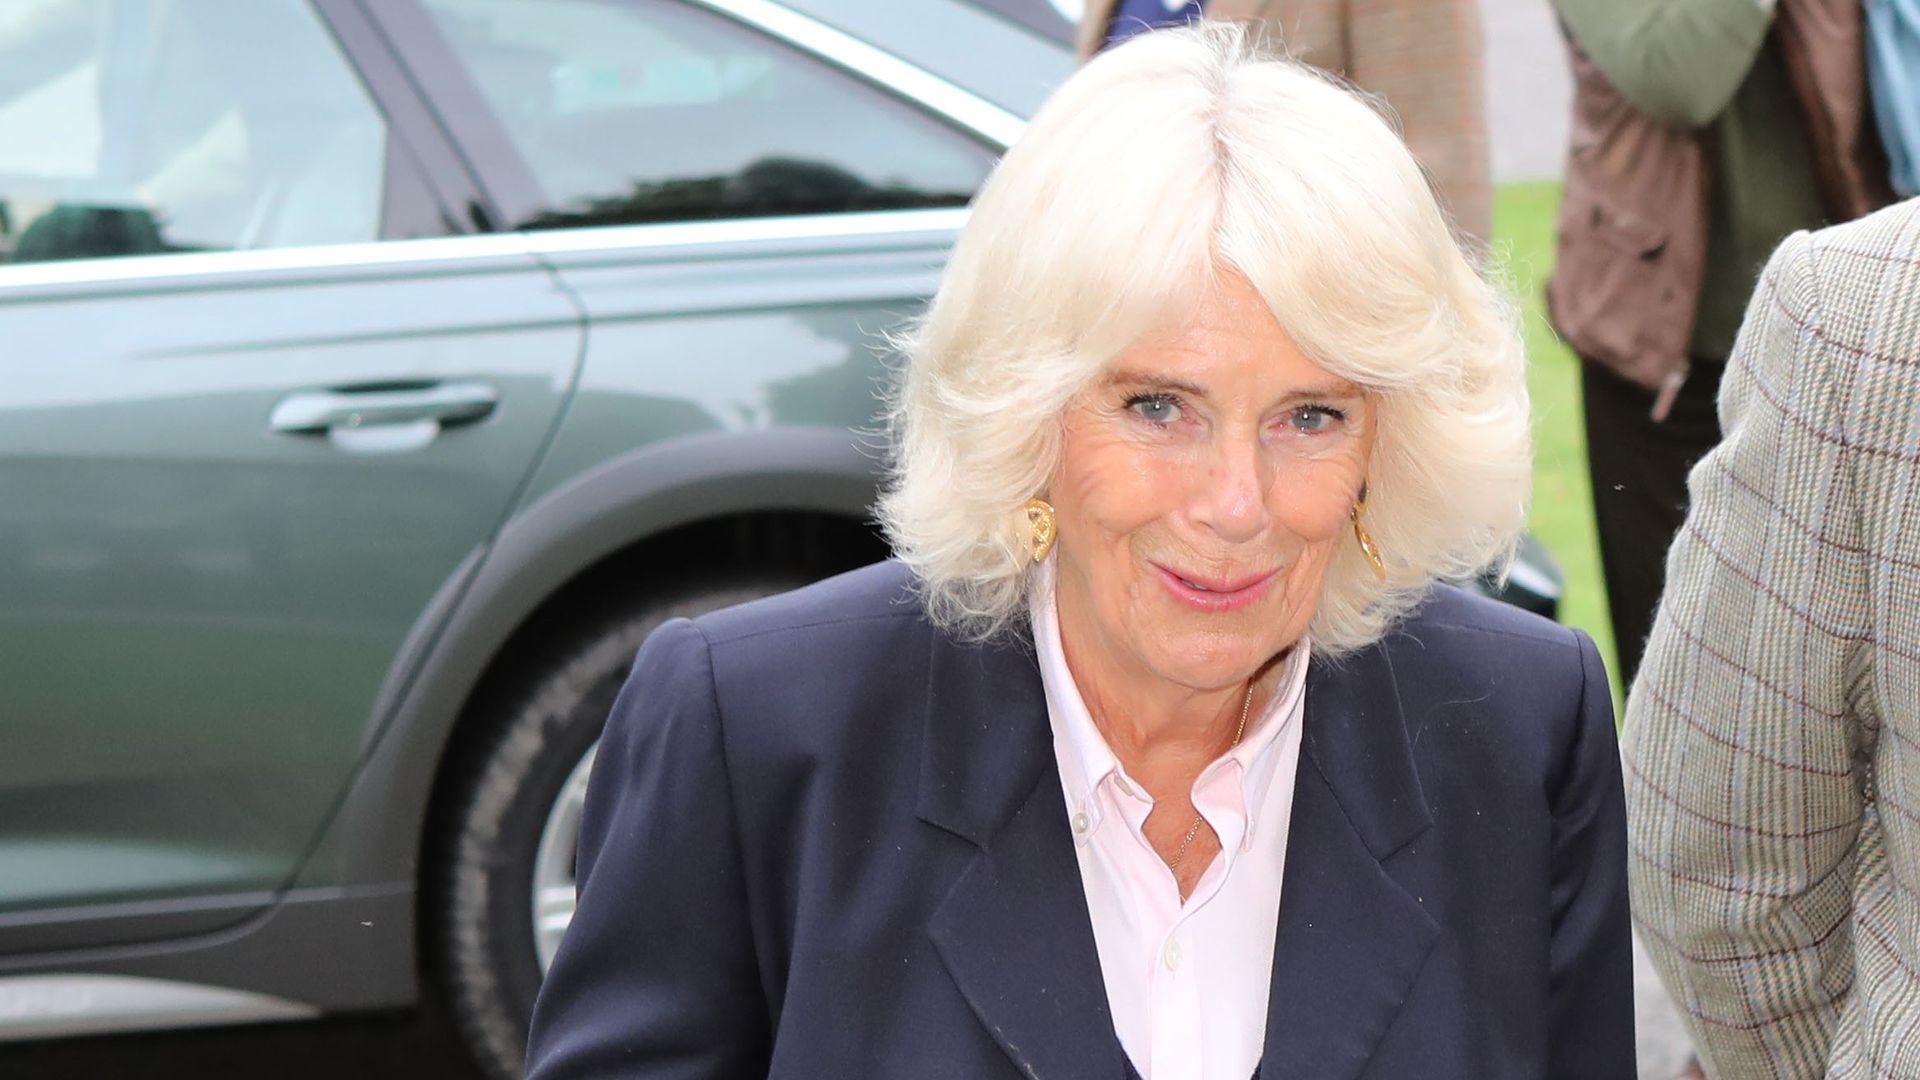 Queen Camilla surprised royal style watchers in skinny jeans and a candy pink blouse